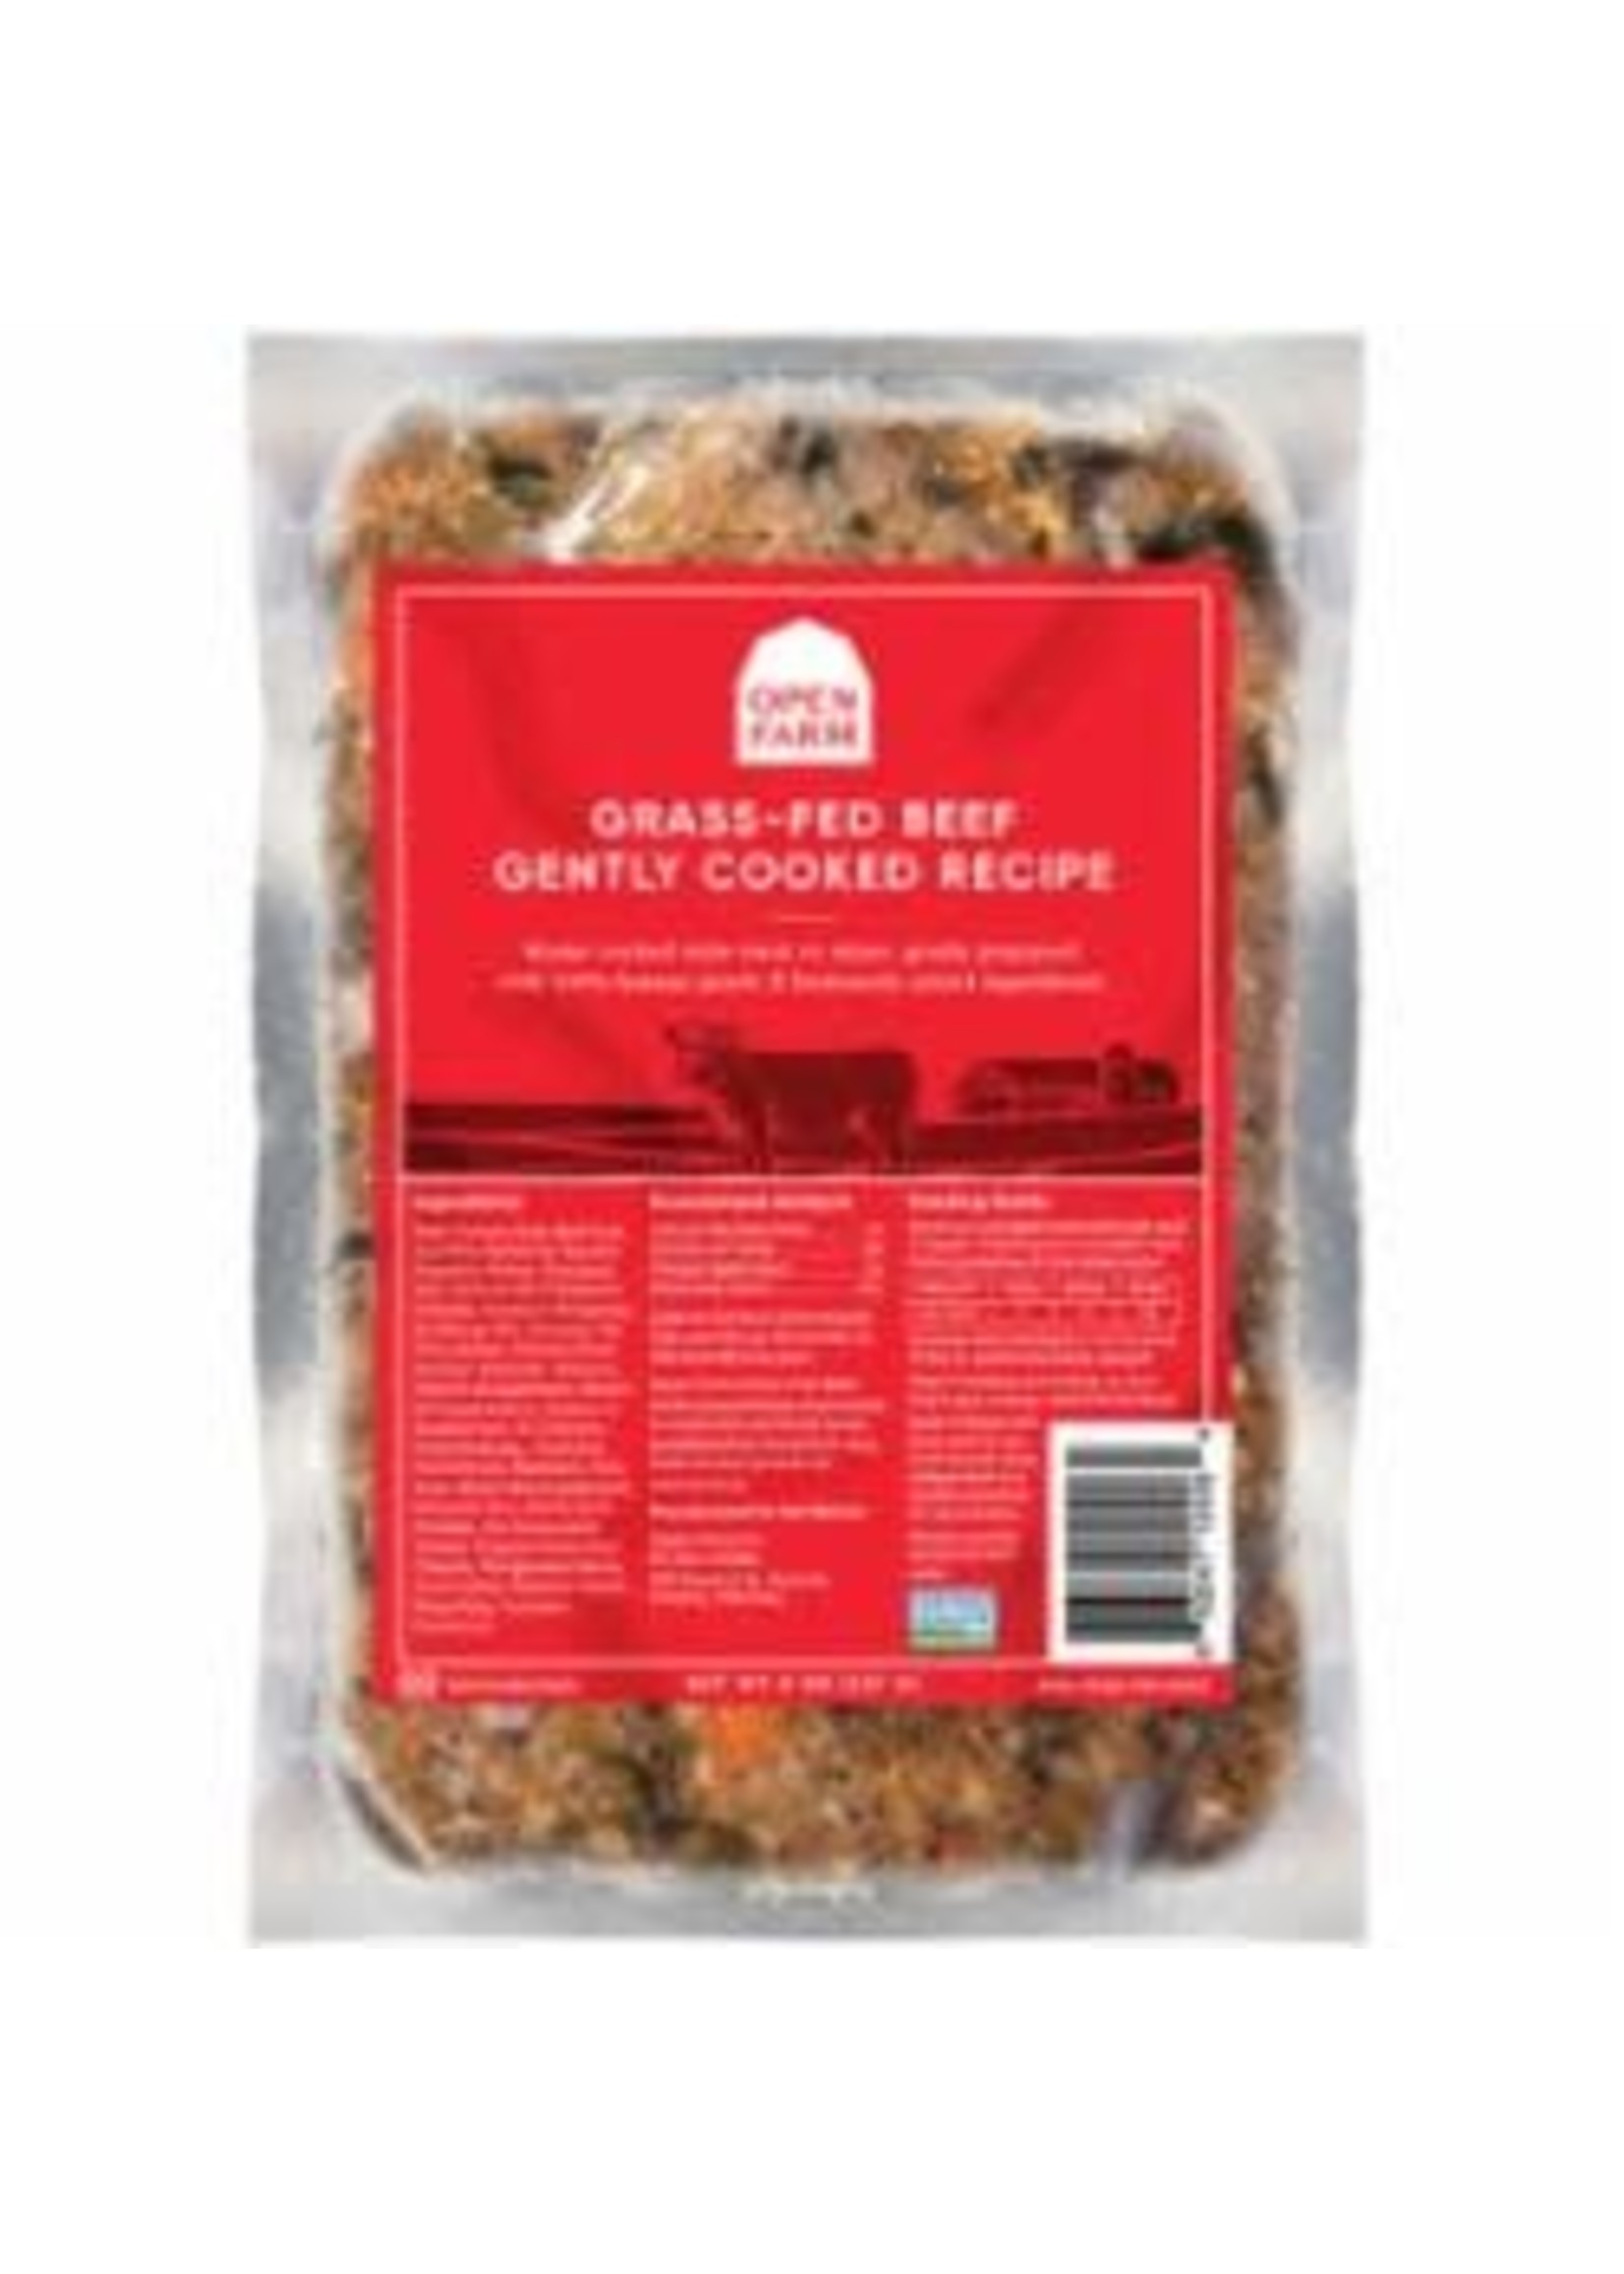 Open Farm Grass-Fed Beef Gently-Cooked Recipe 16oz